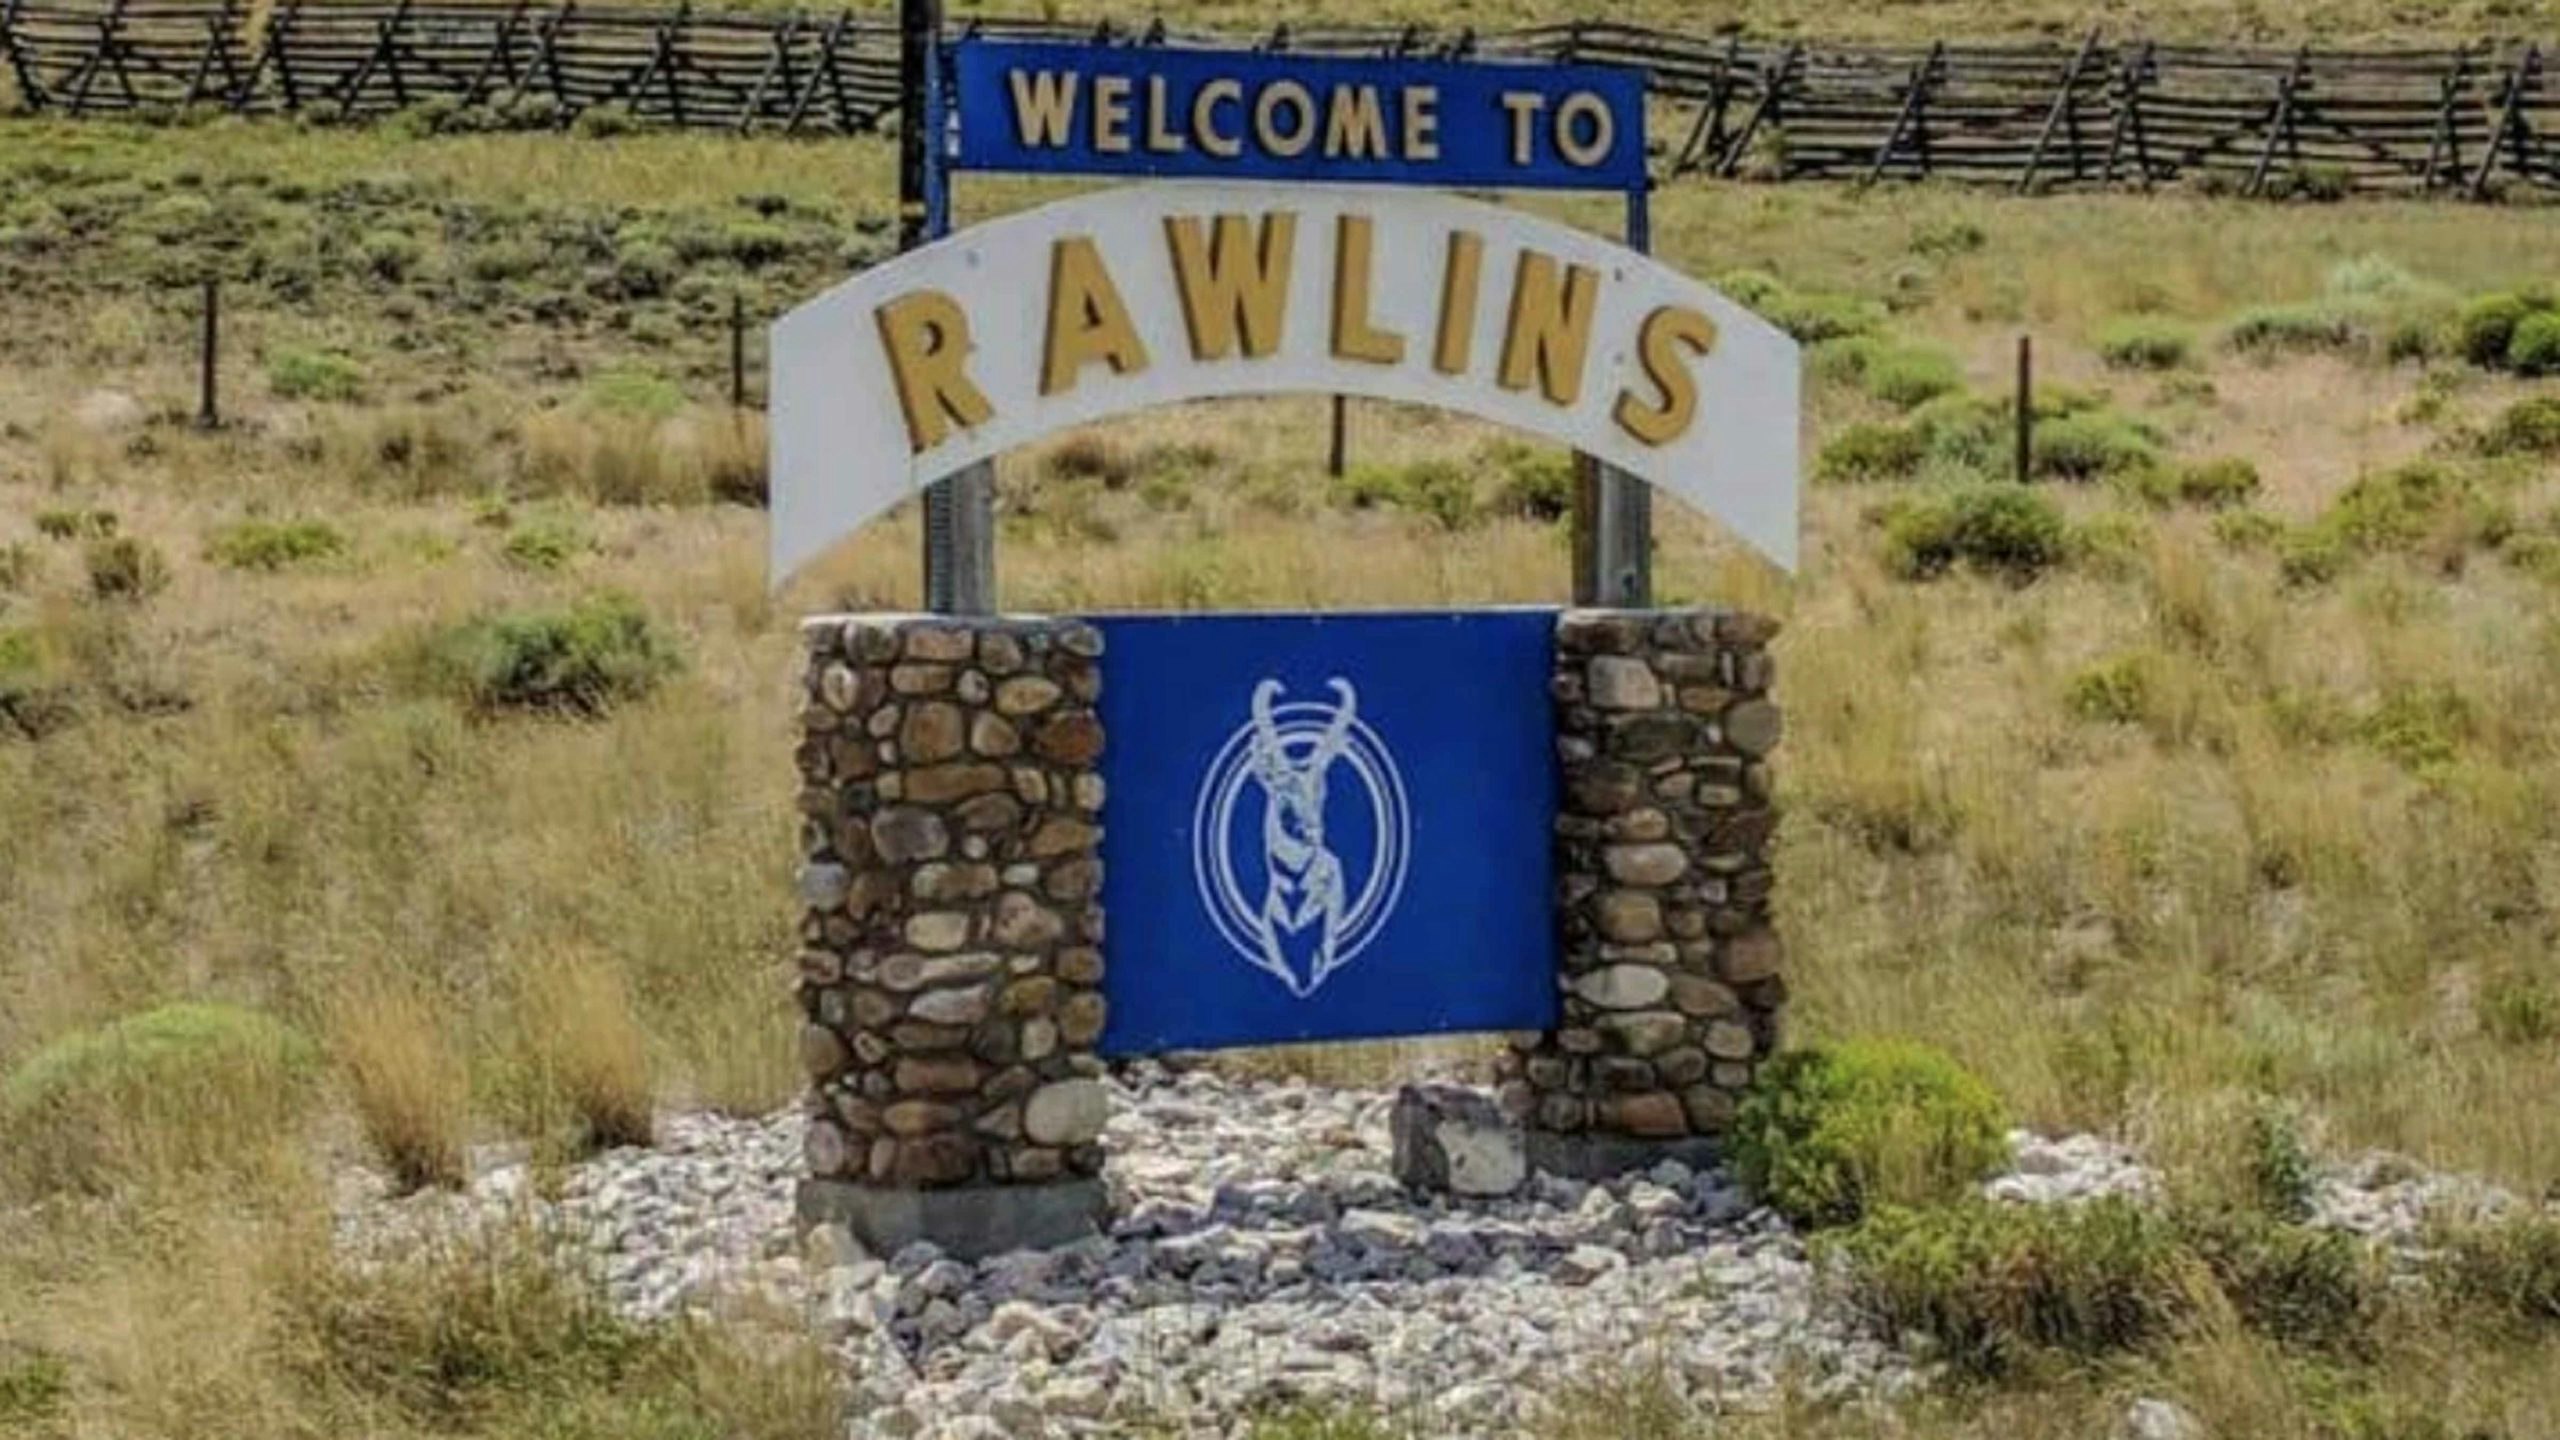 Welcome to rawlins sign scaled